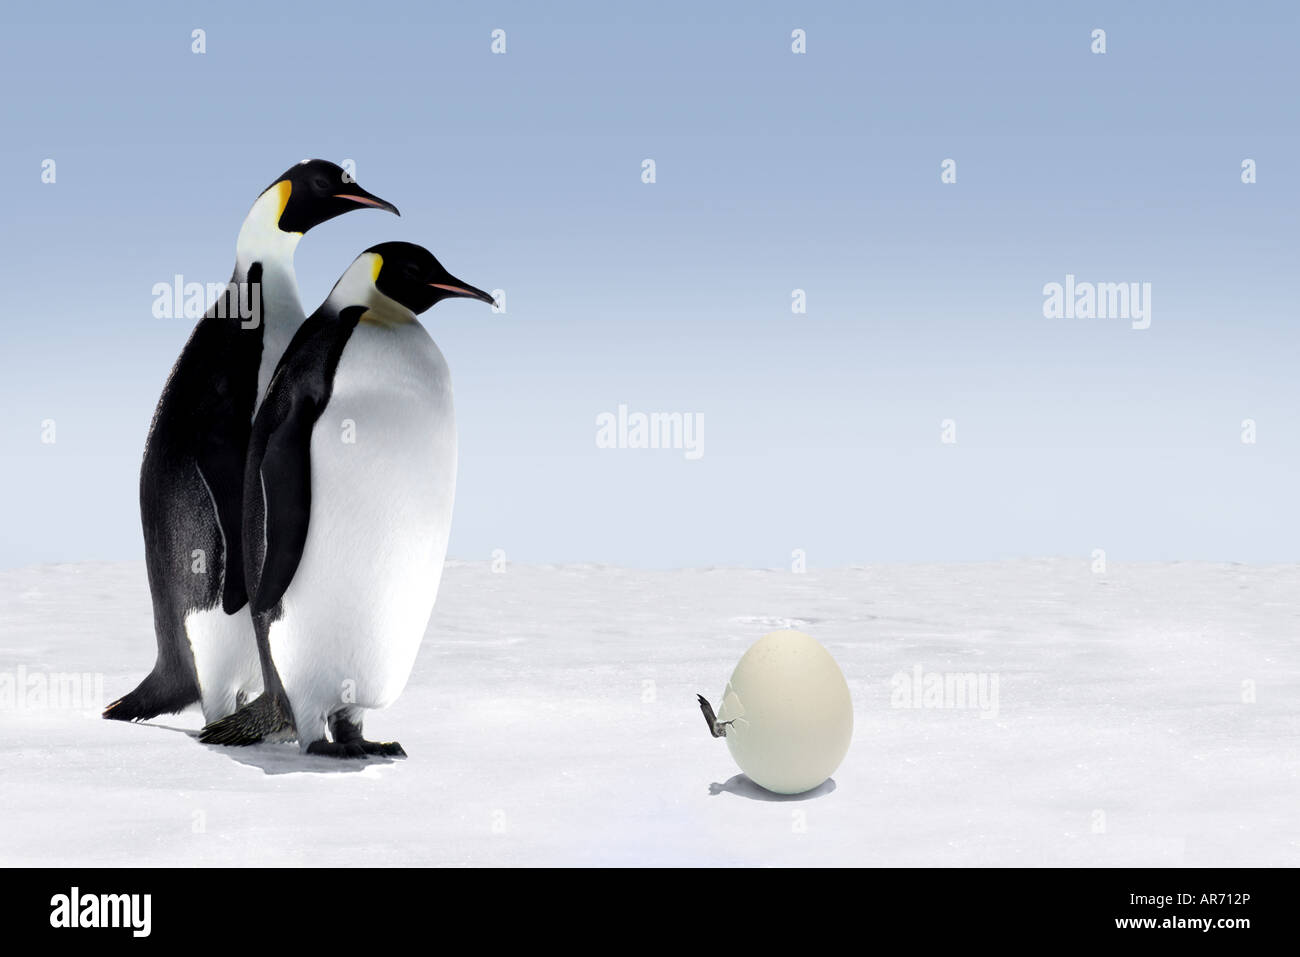 A baby penguin hatching while the parents are watching Stock Photo